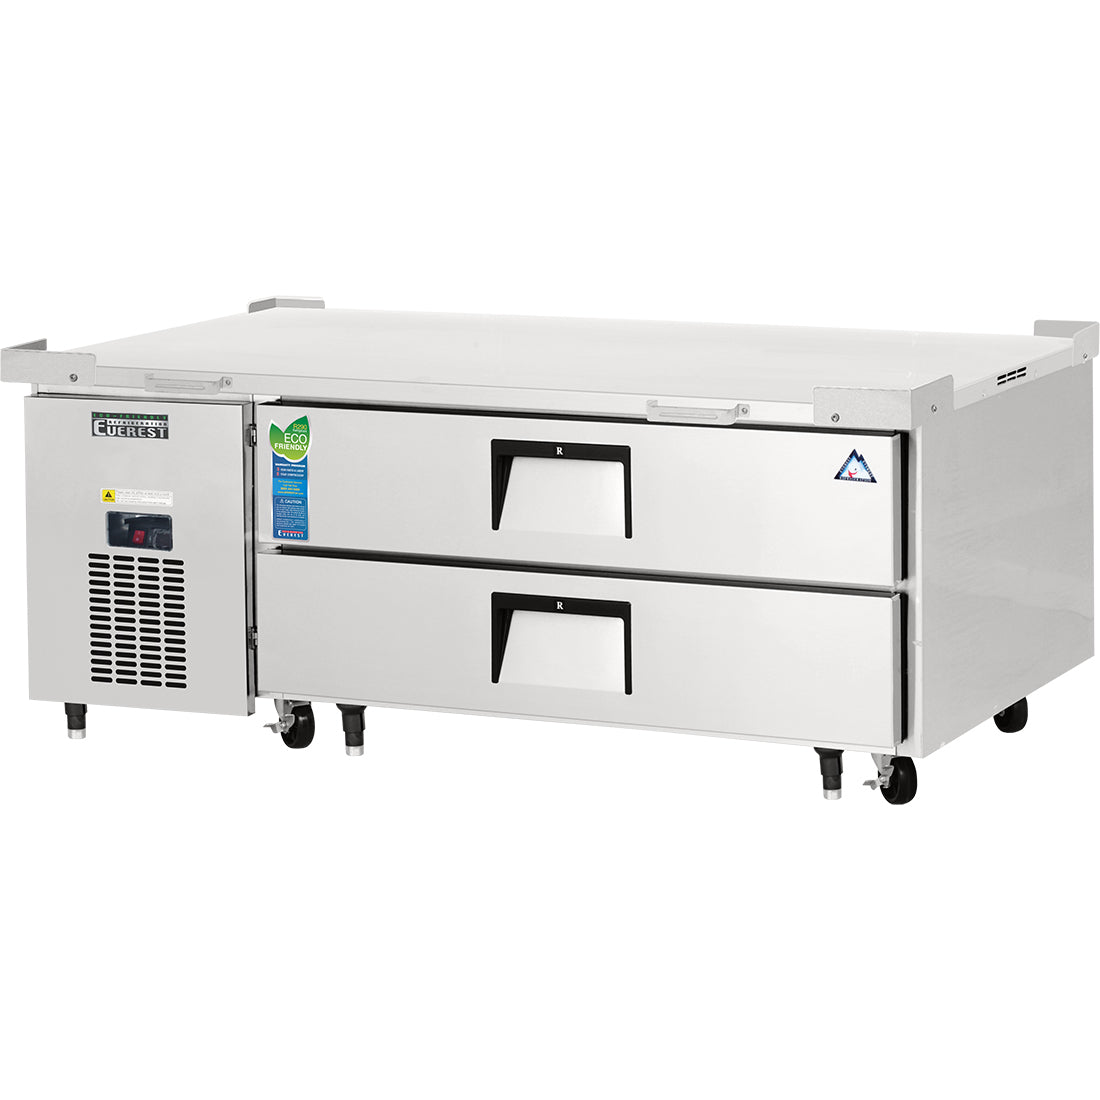 Everest EC Series-ECB52-60D2 One Section Two Drawer Side Mount Refrigerated Chef Base - 115V